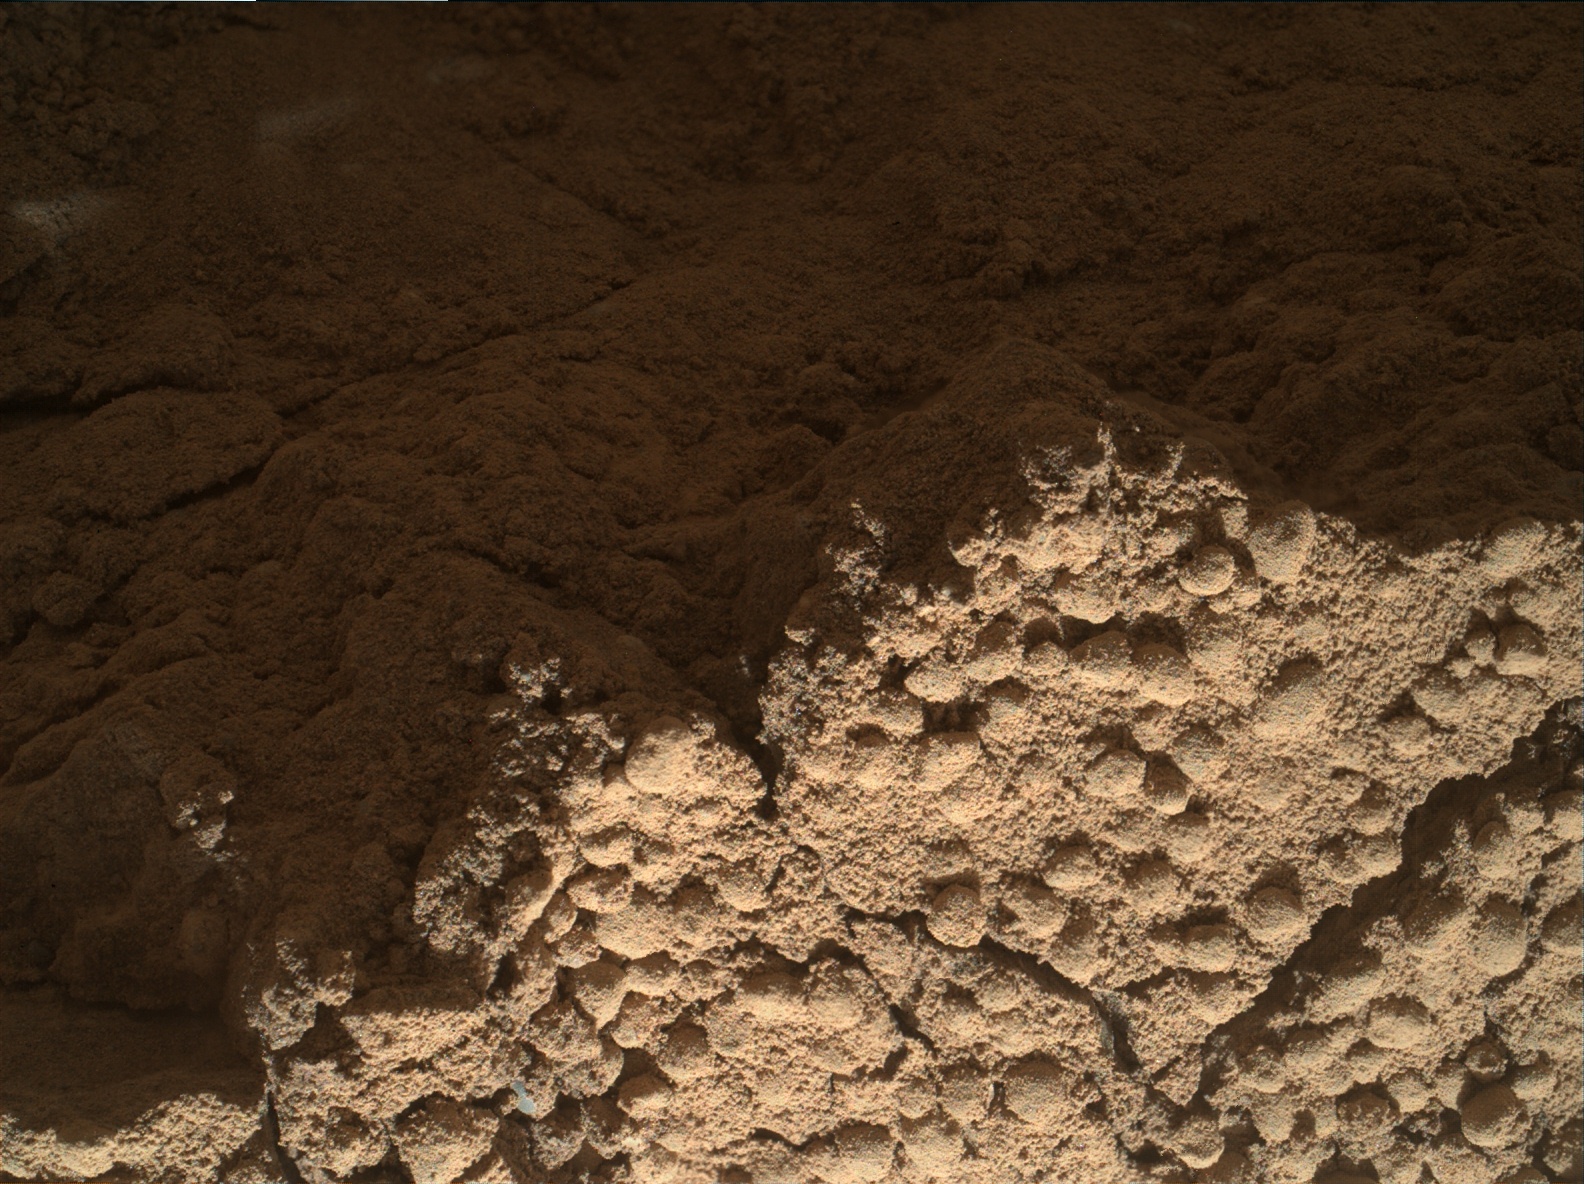 Nasa's Mars rover Curiosity acquired this image using its Mars Hand Lens Imager (MAHLI) on Sol 531